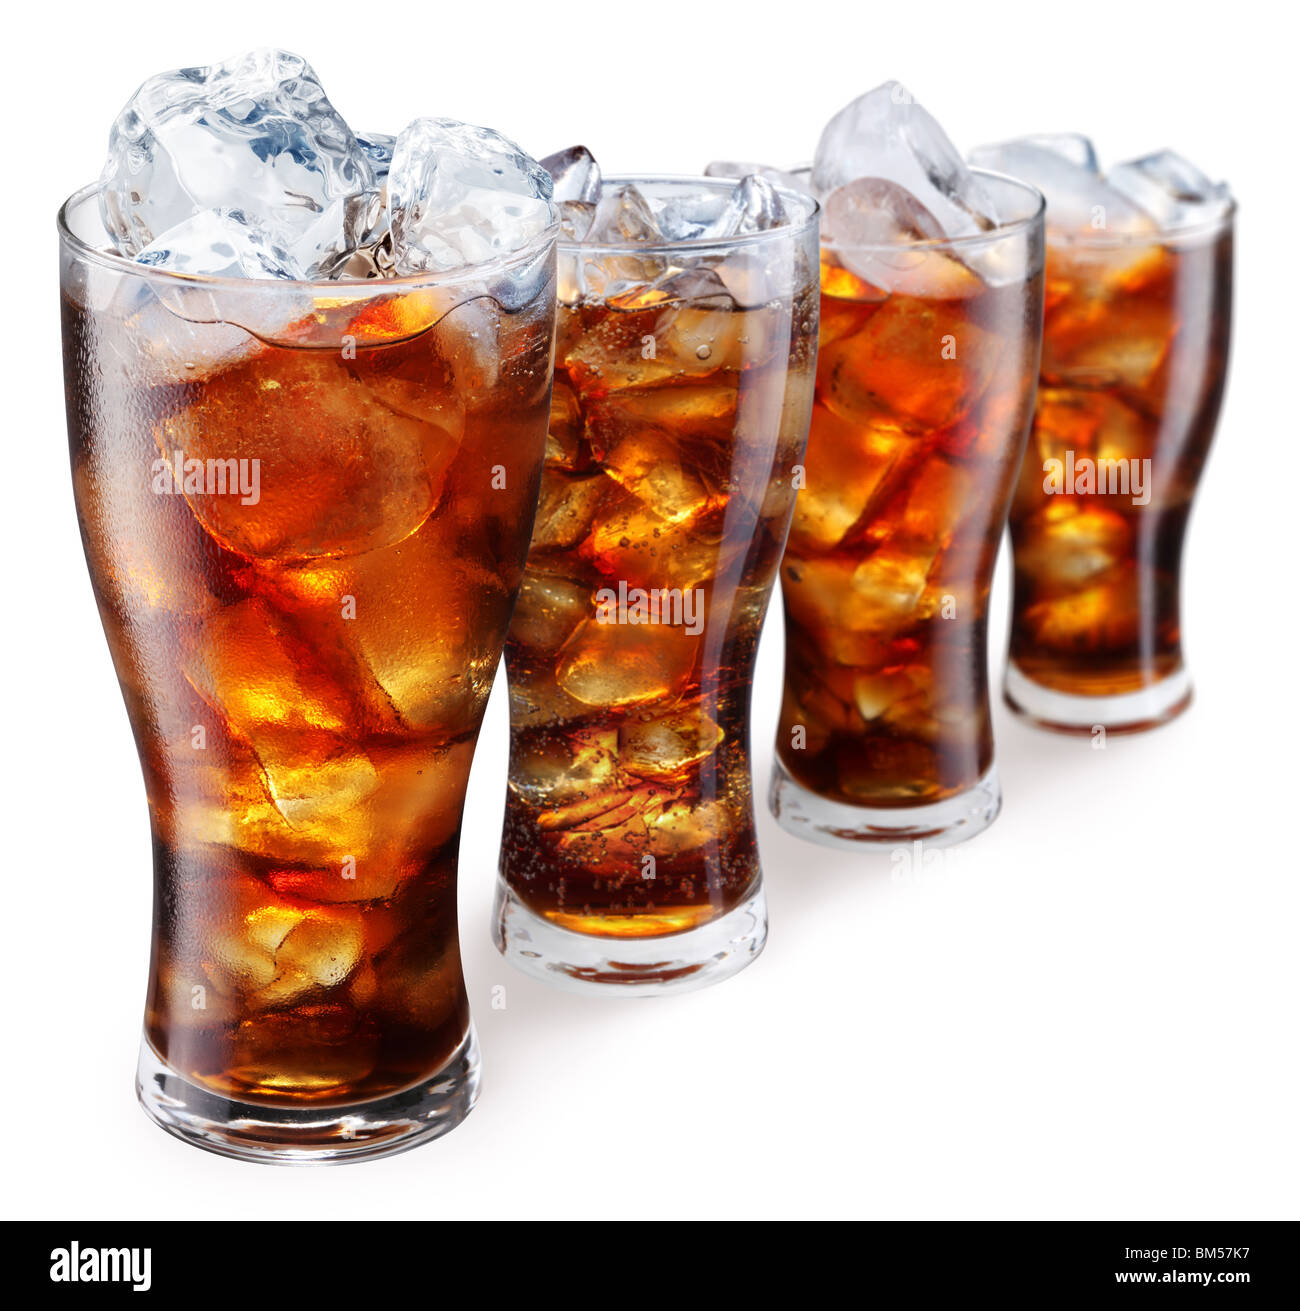 https://c8.alamy.com/comp/BM57K7/glasses-with-cola-and-ice-cubes-on-a-white-background-BM57K7.jpg